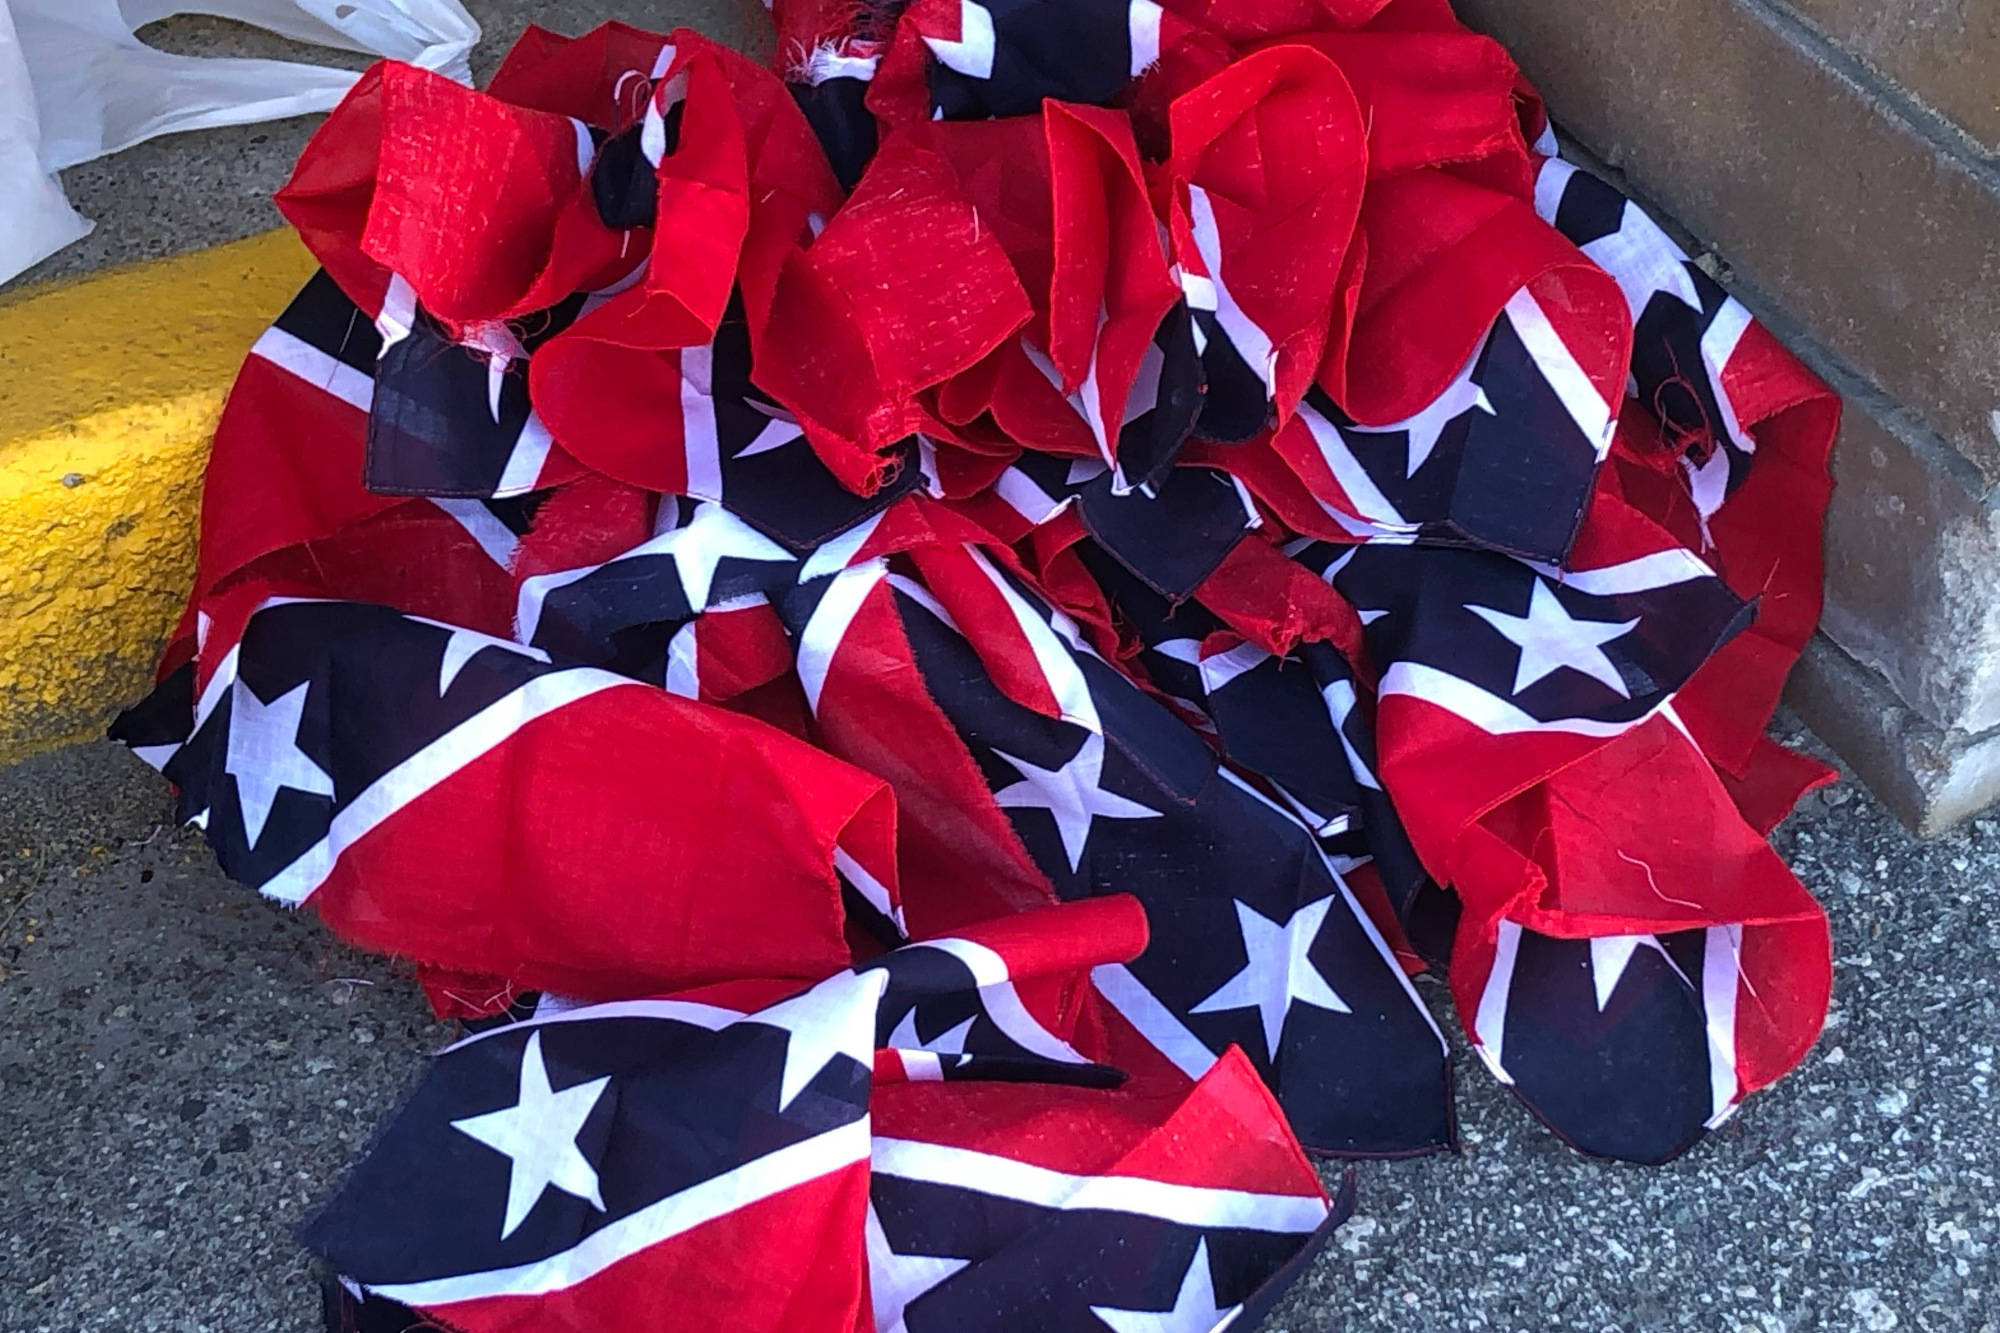 22169833_web1_200723-SUM-Confederate-flags-destroyed-SUMMERLAND_3